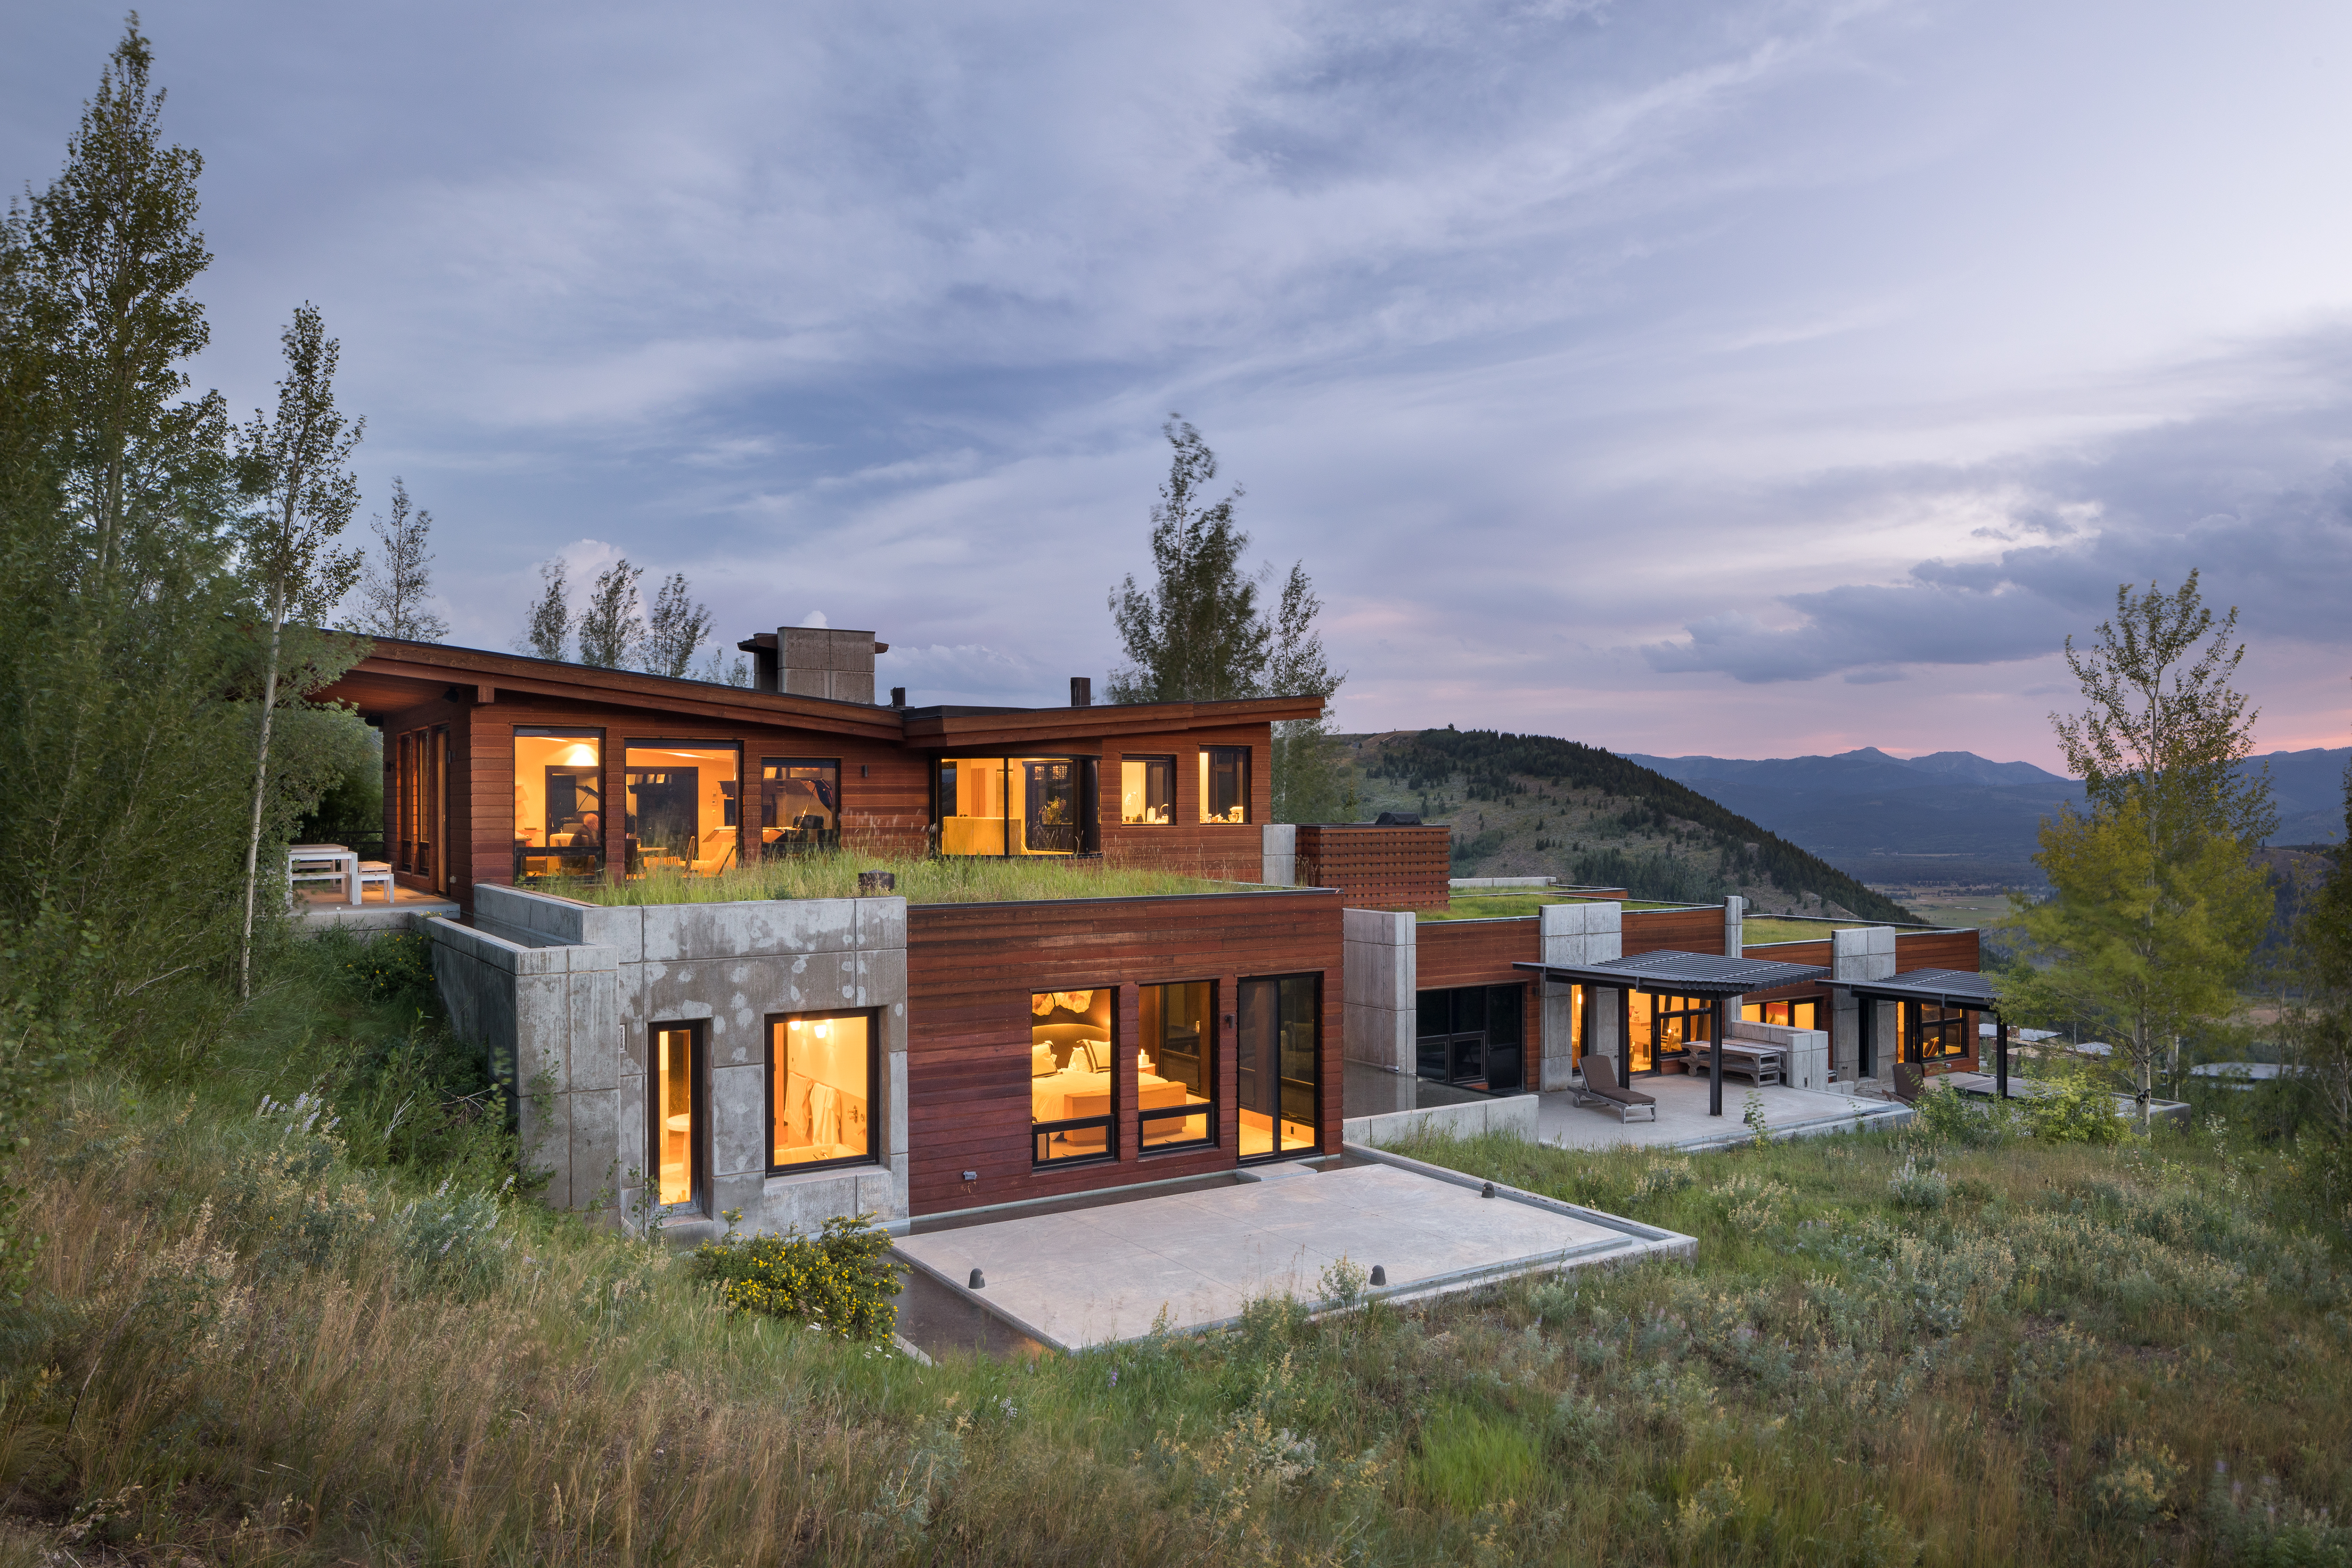 Home in Jackson Hole with views of mountains